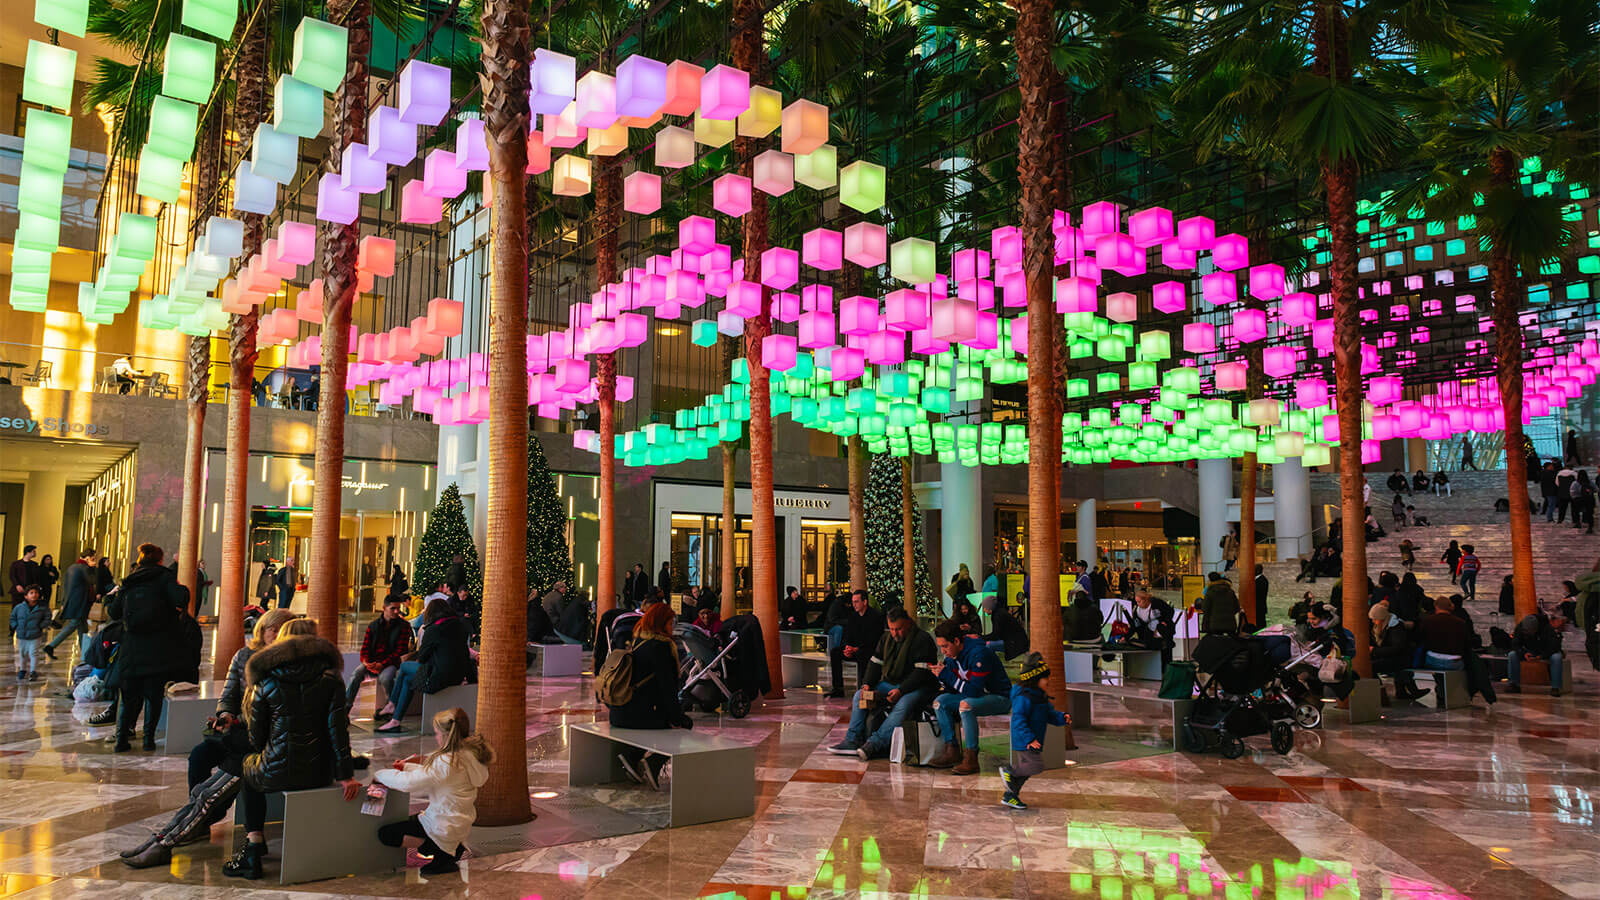 the Winter Garden during the Luminaries light festival, showcasing many colorful neon lights above the Garden